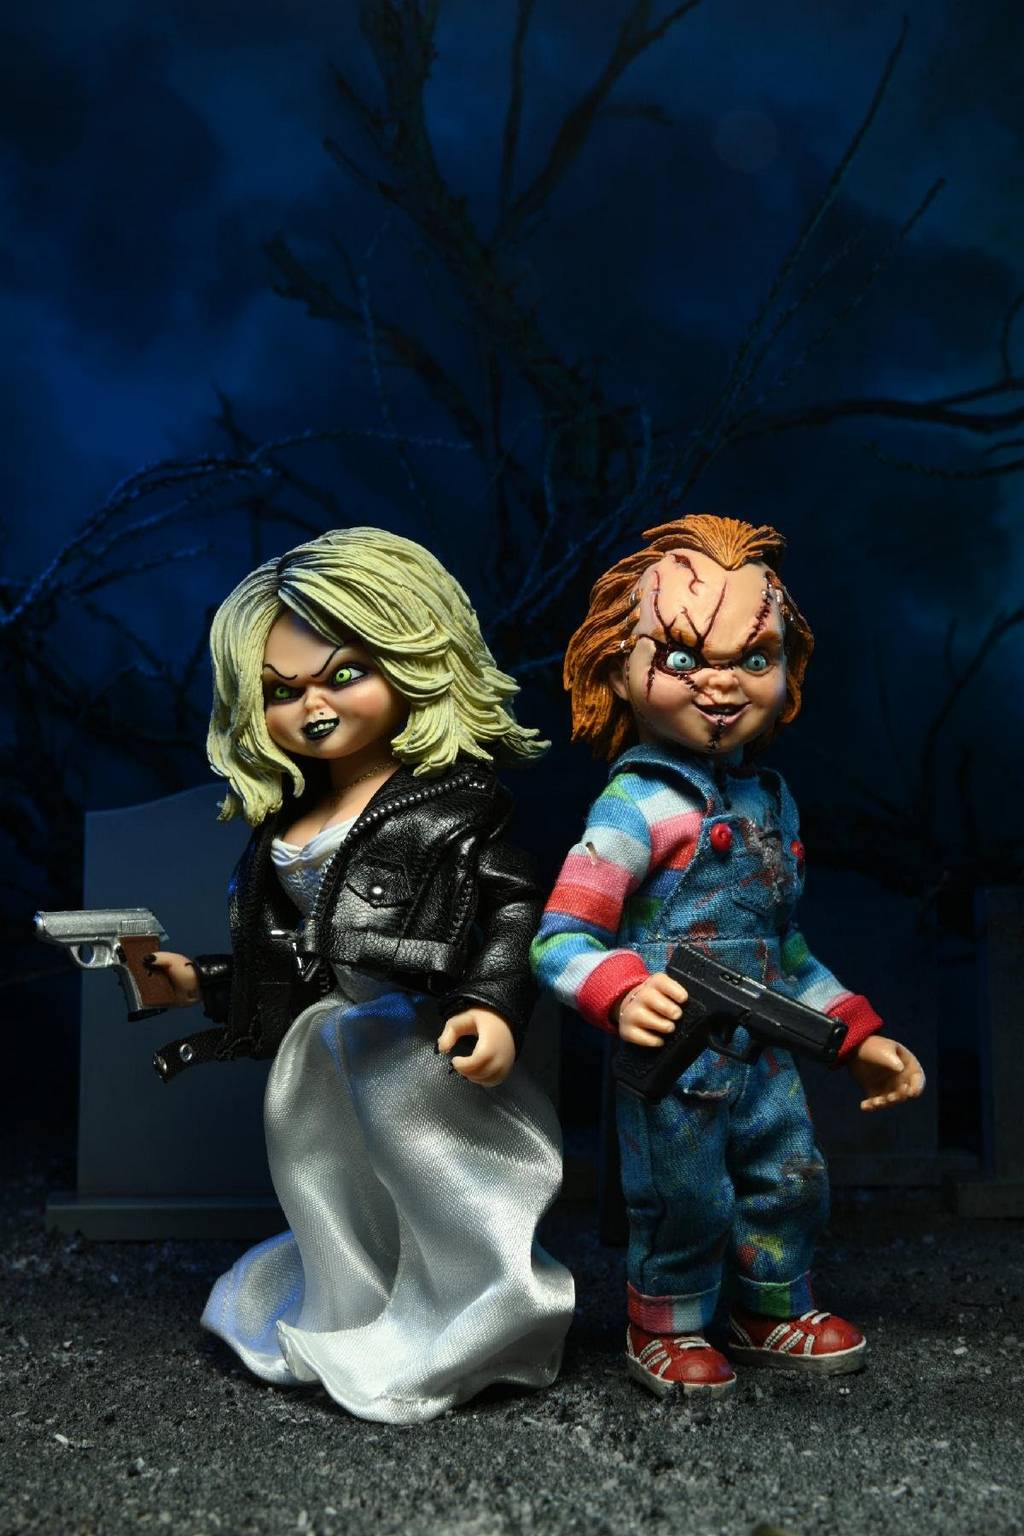 Bride of Chucky: Chucky and Tiffany 8 inch Clothed Action Figure 2-Pack Neca